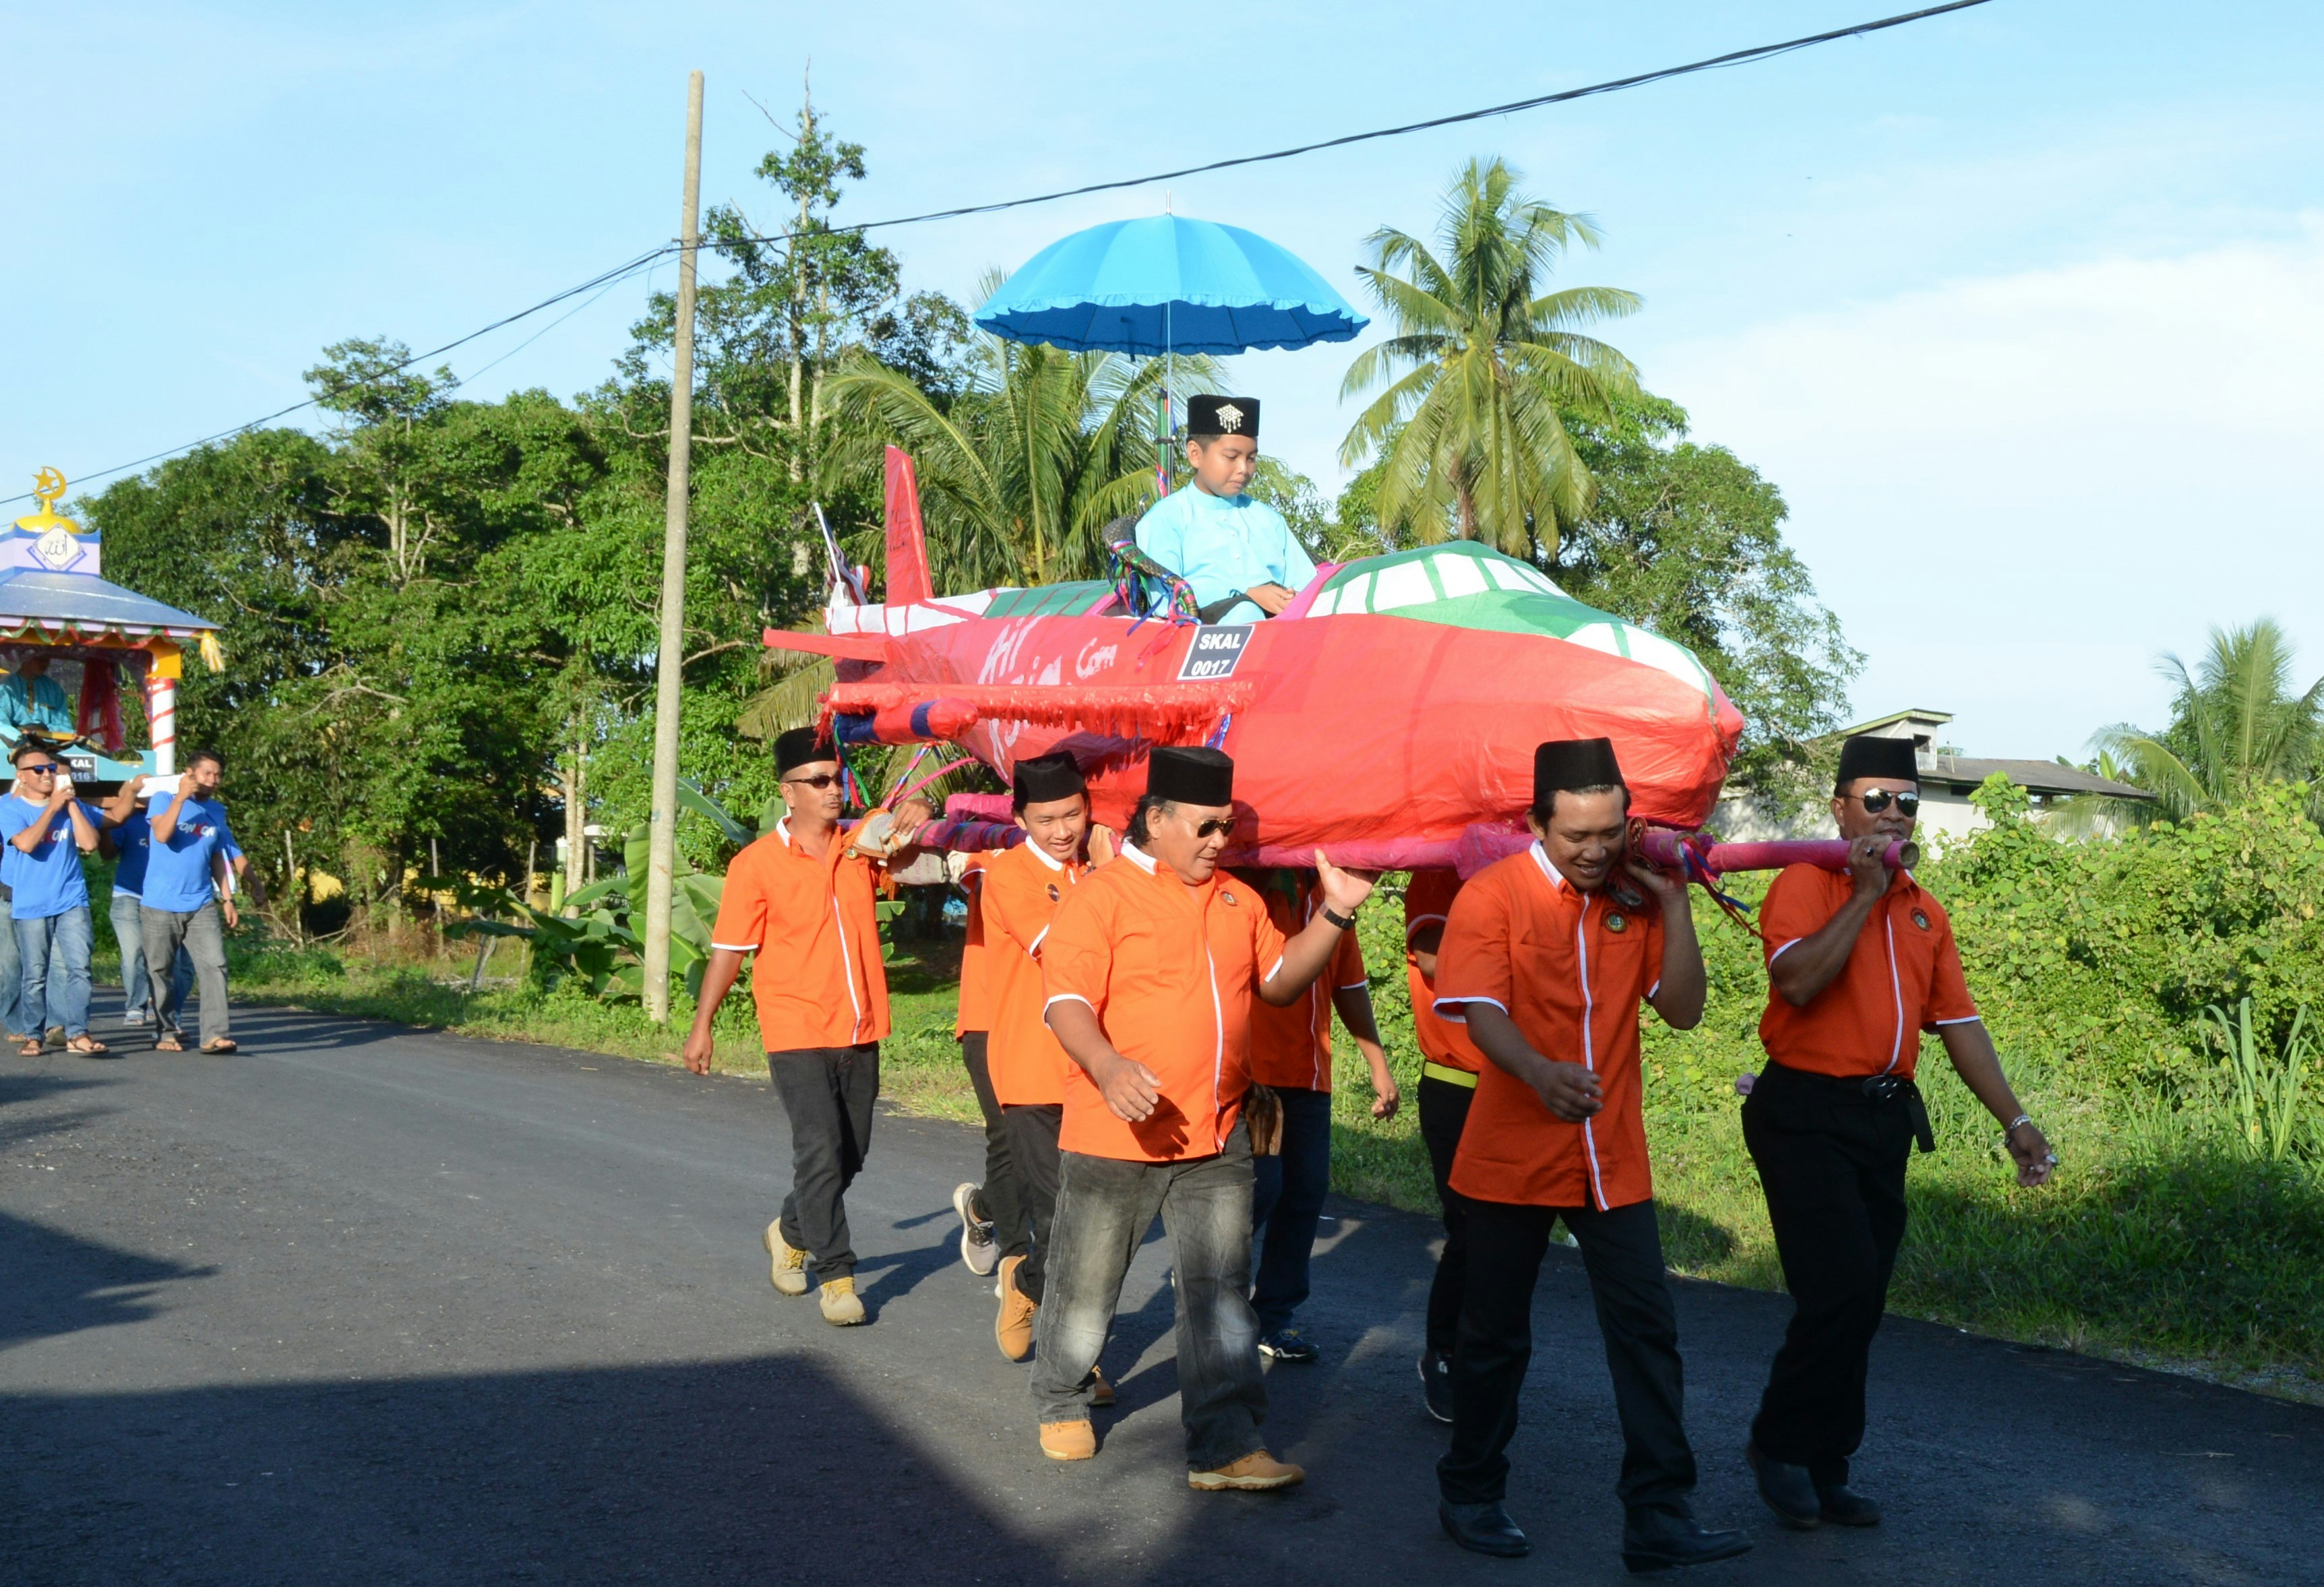 A group of men dressed in orange hold an usungan aircraft with a child dressed in blue in the passenger's seat.